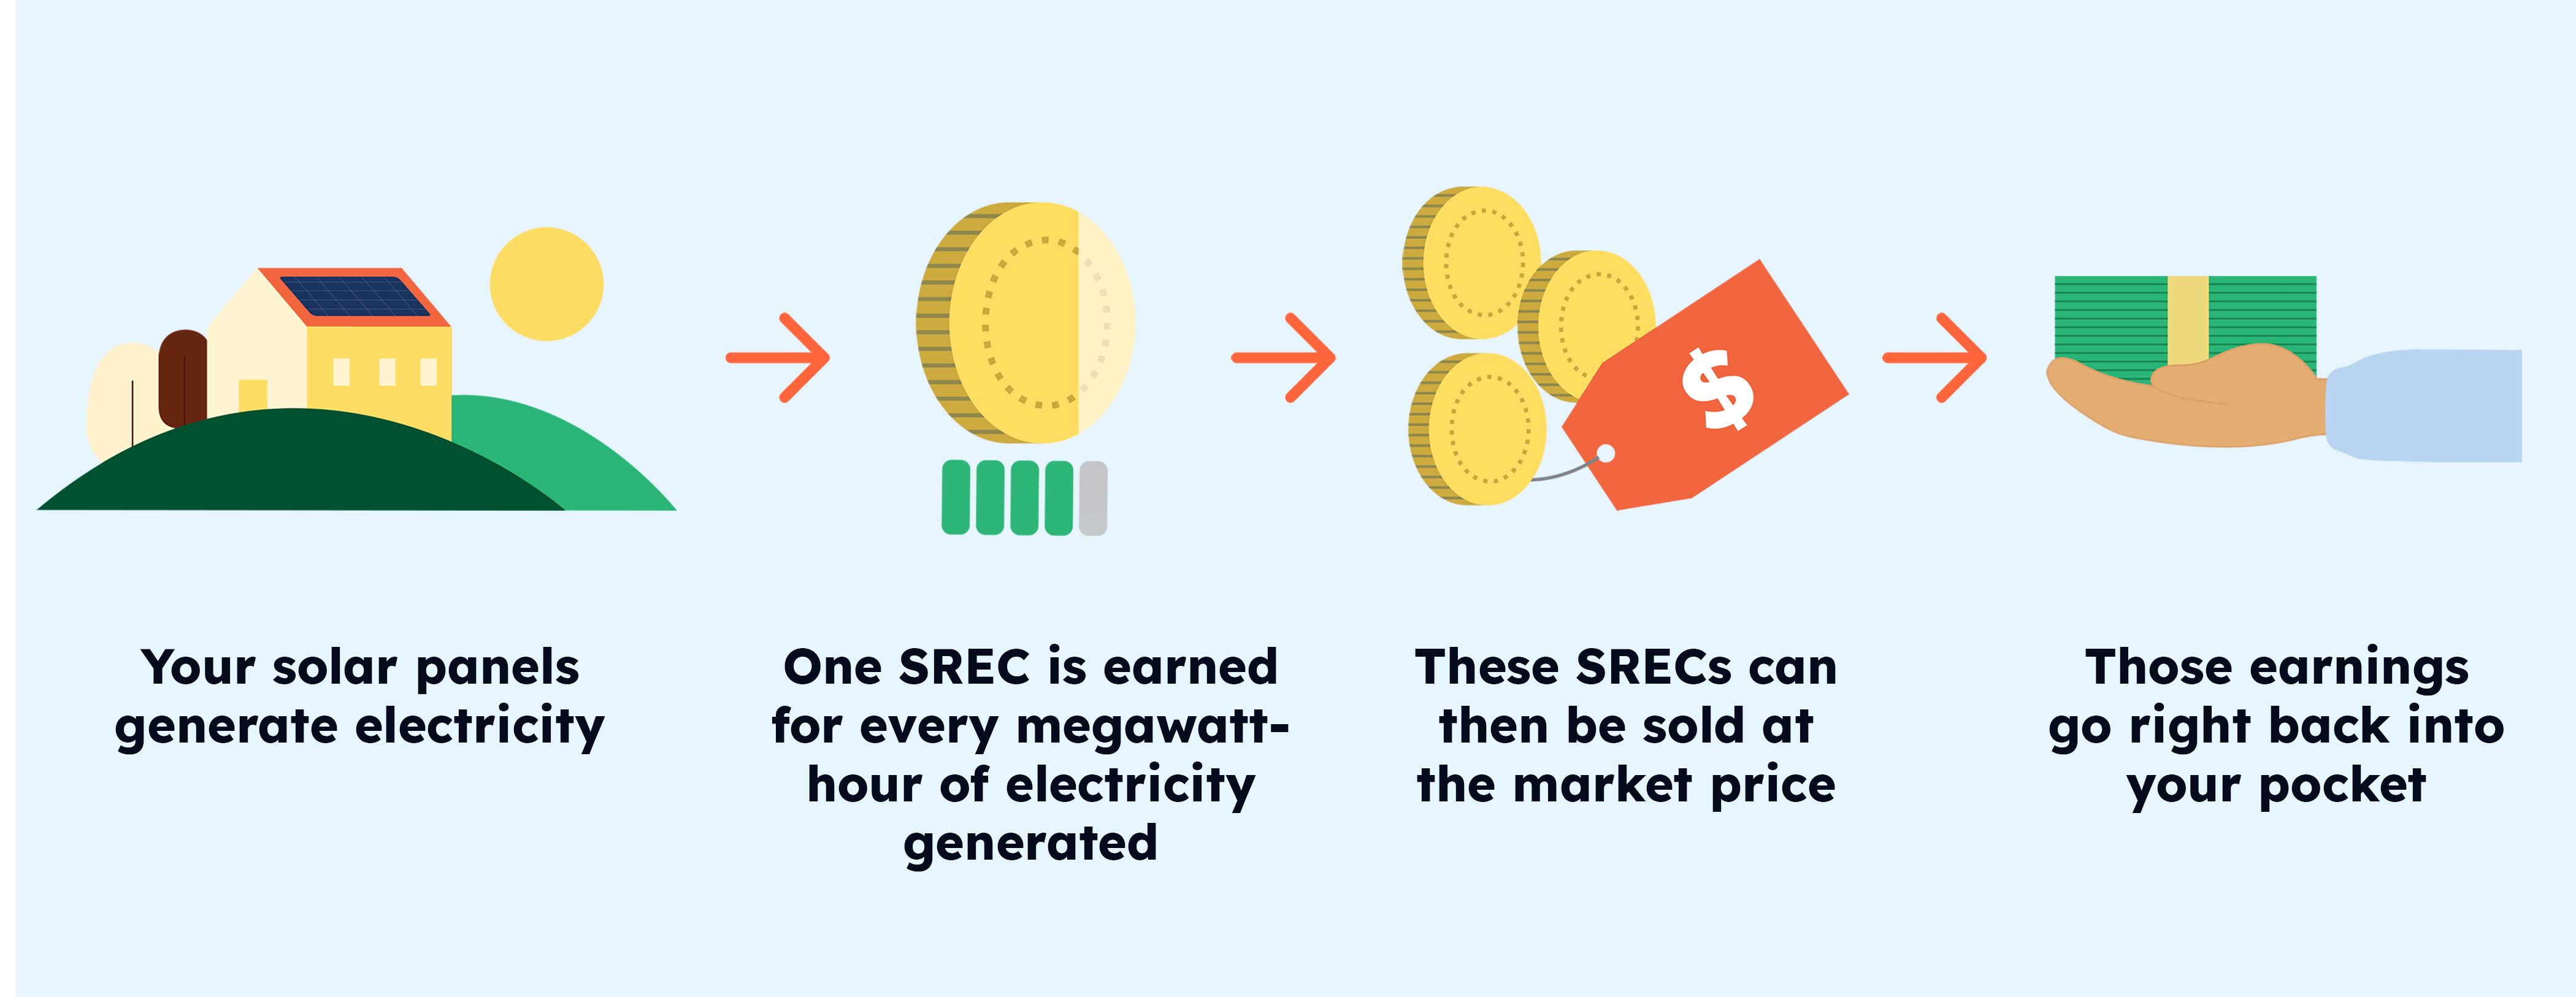 four step guide to how SRECs work